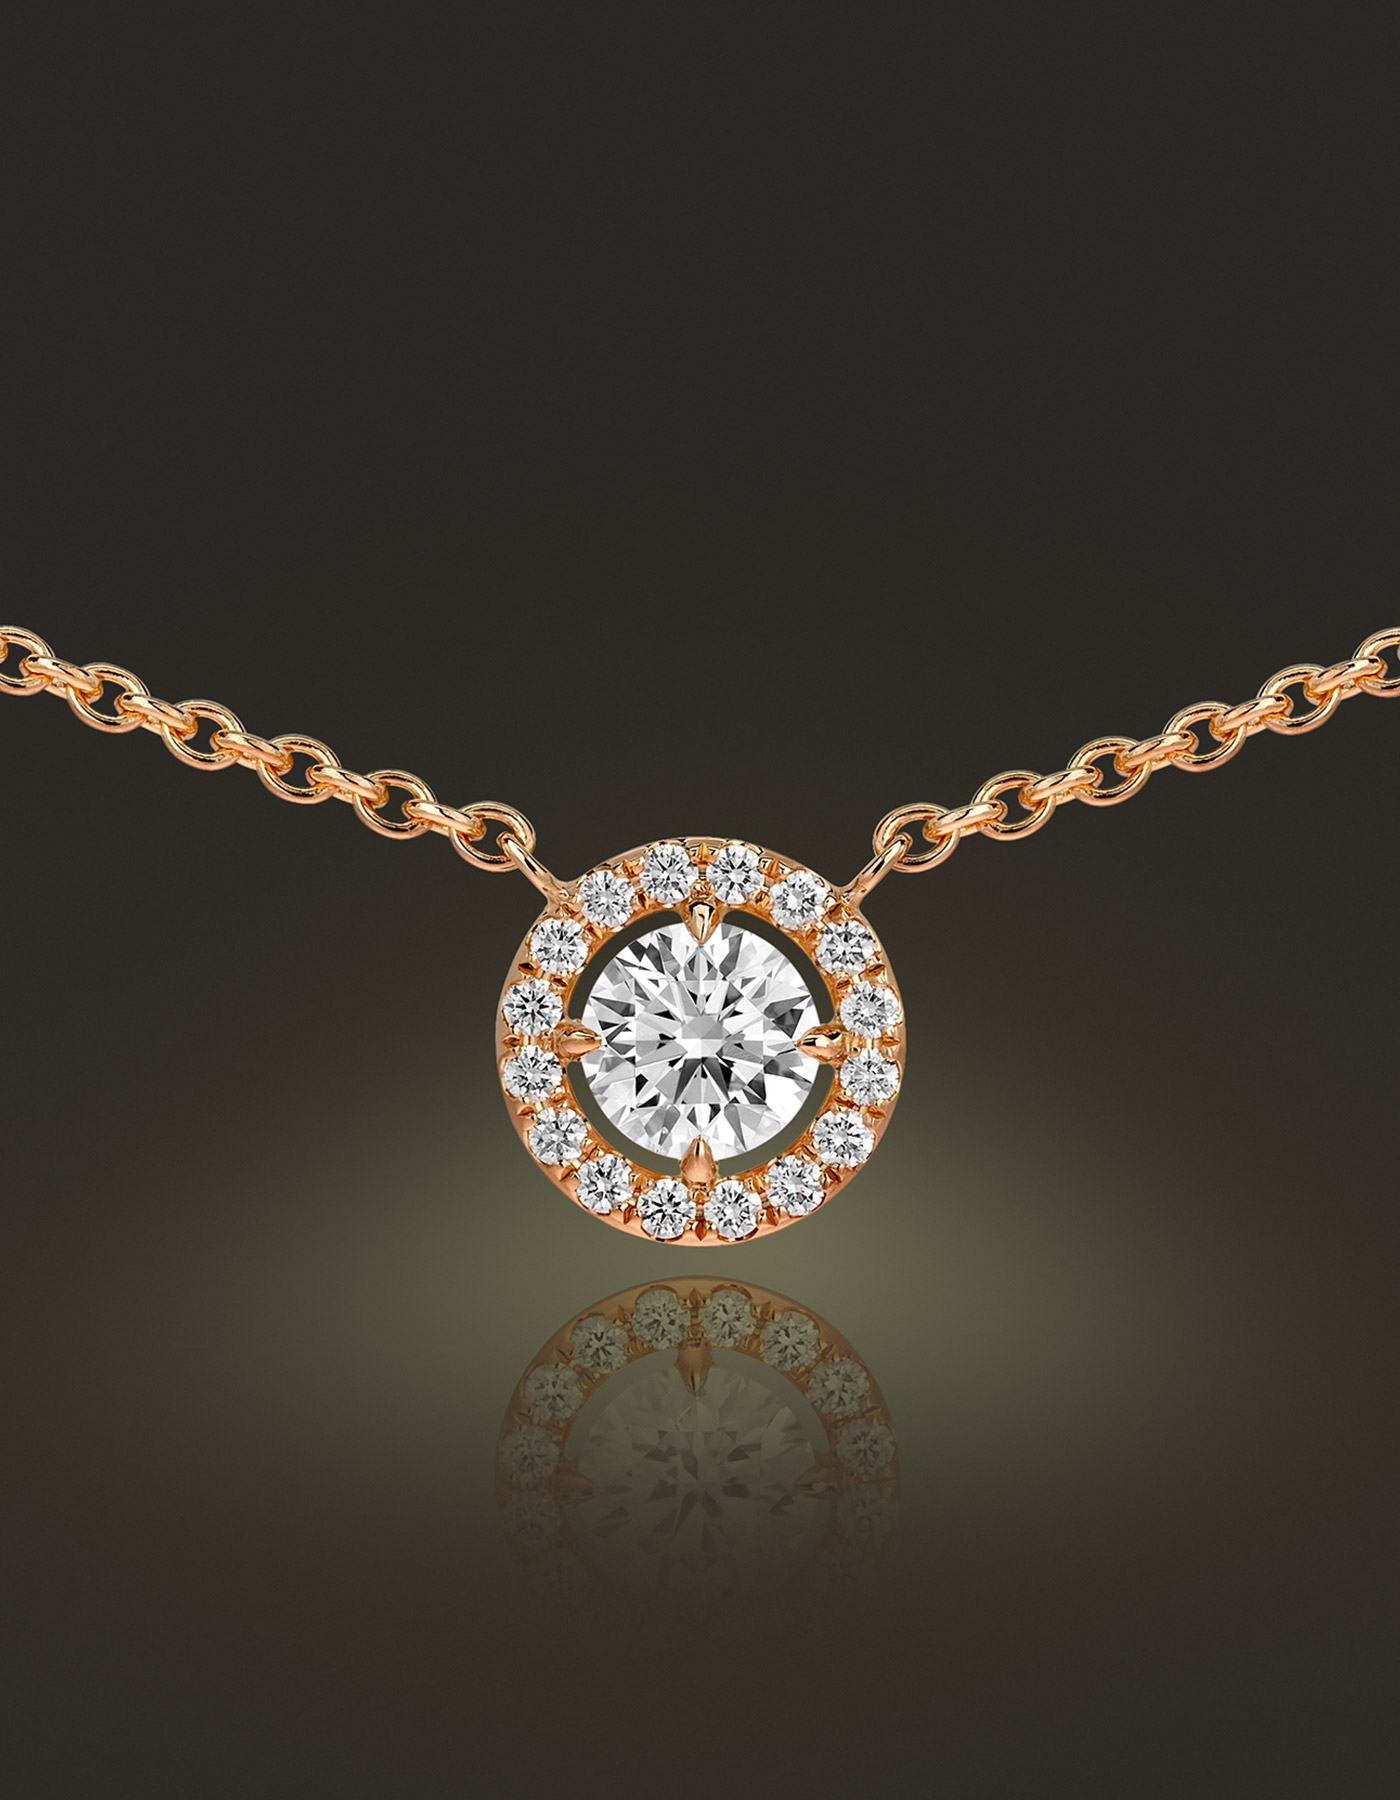 Guinnot Anonymous Halo pendant in 18k rose gold